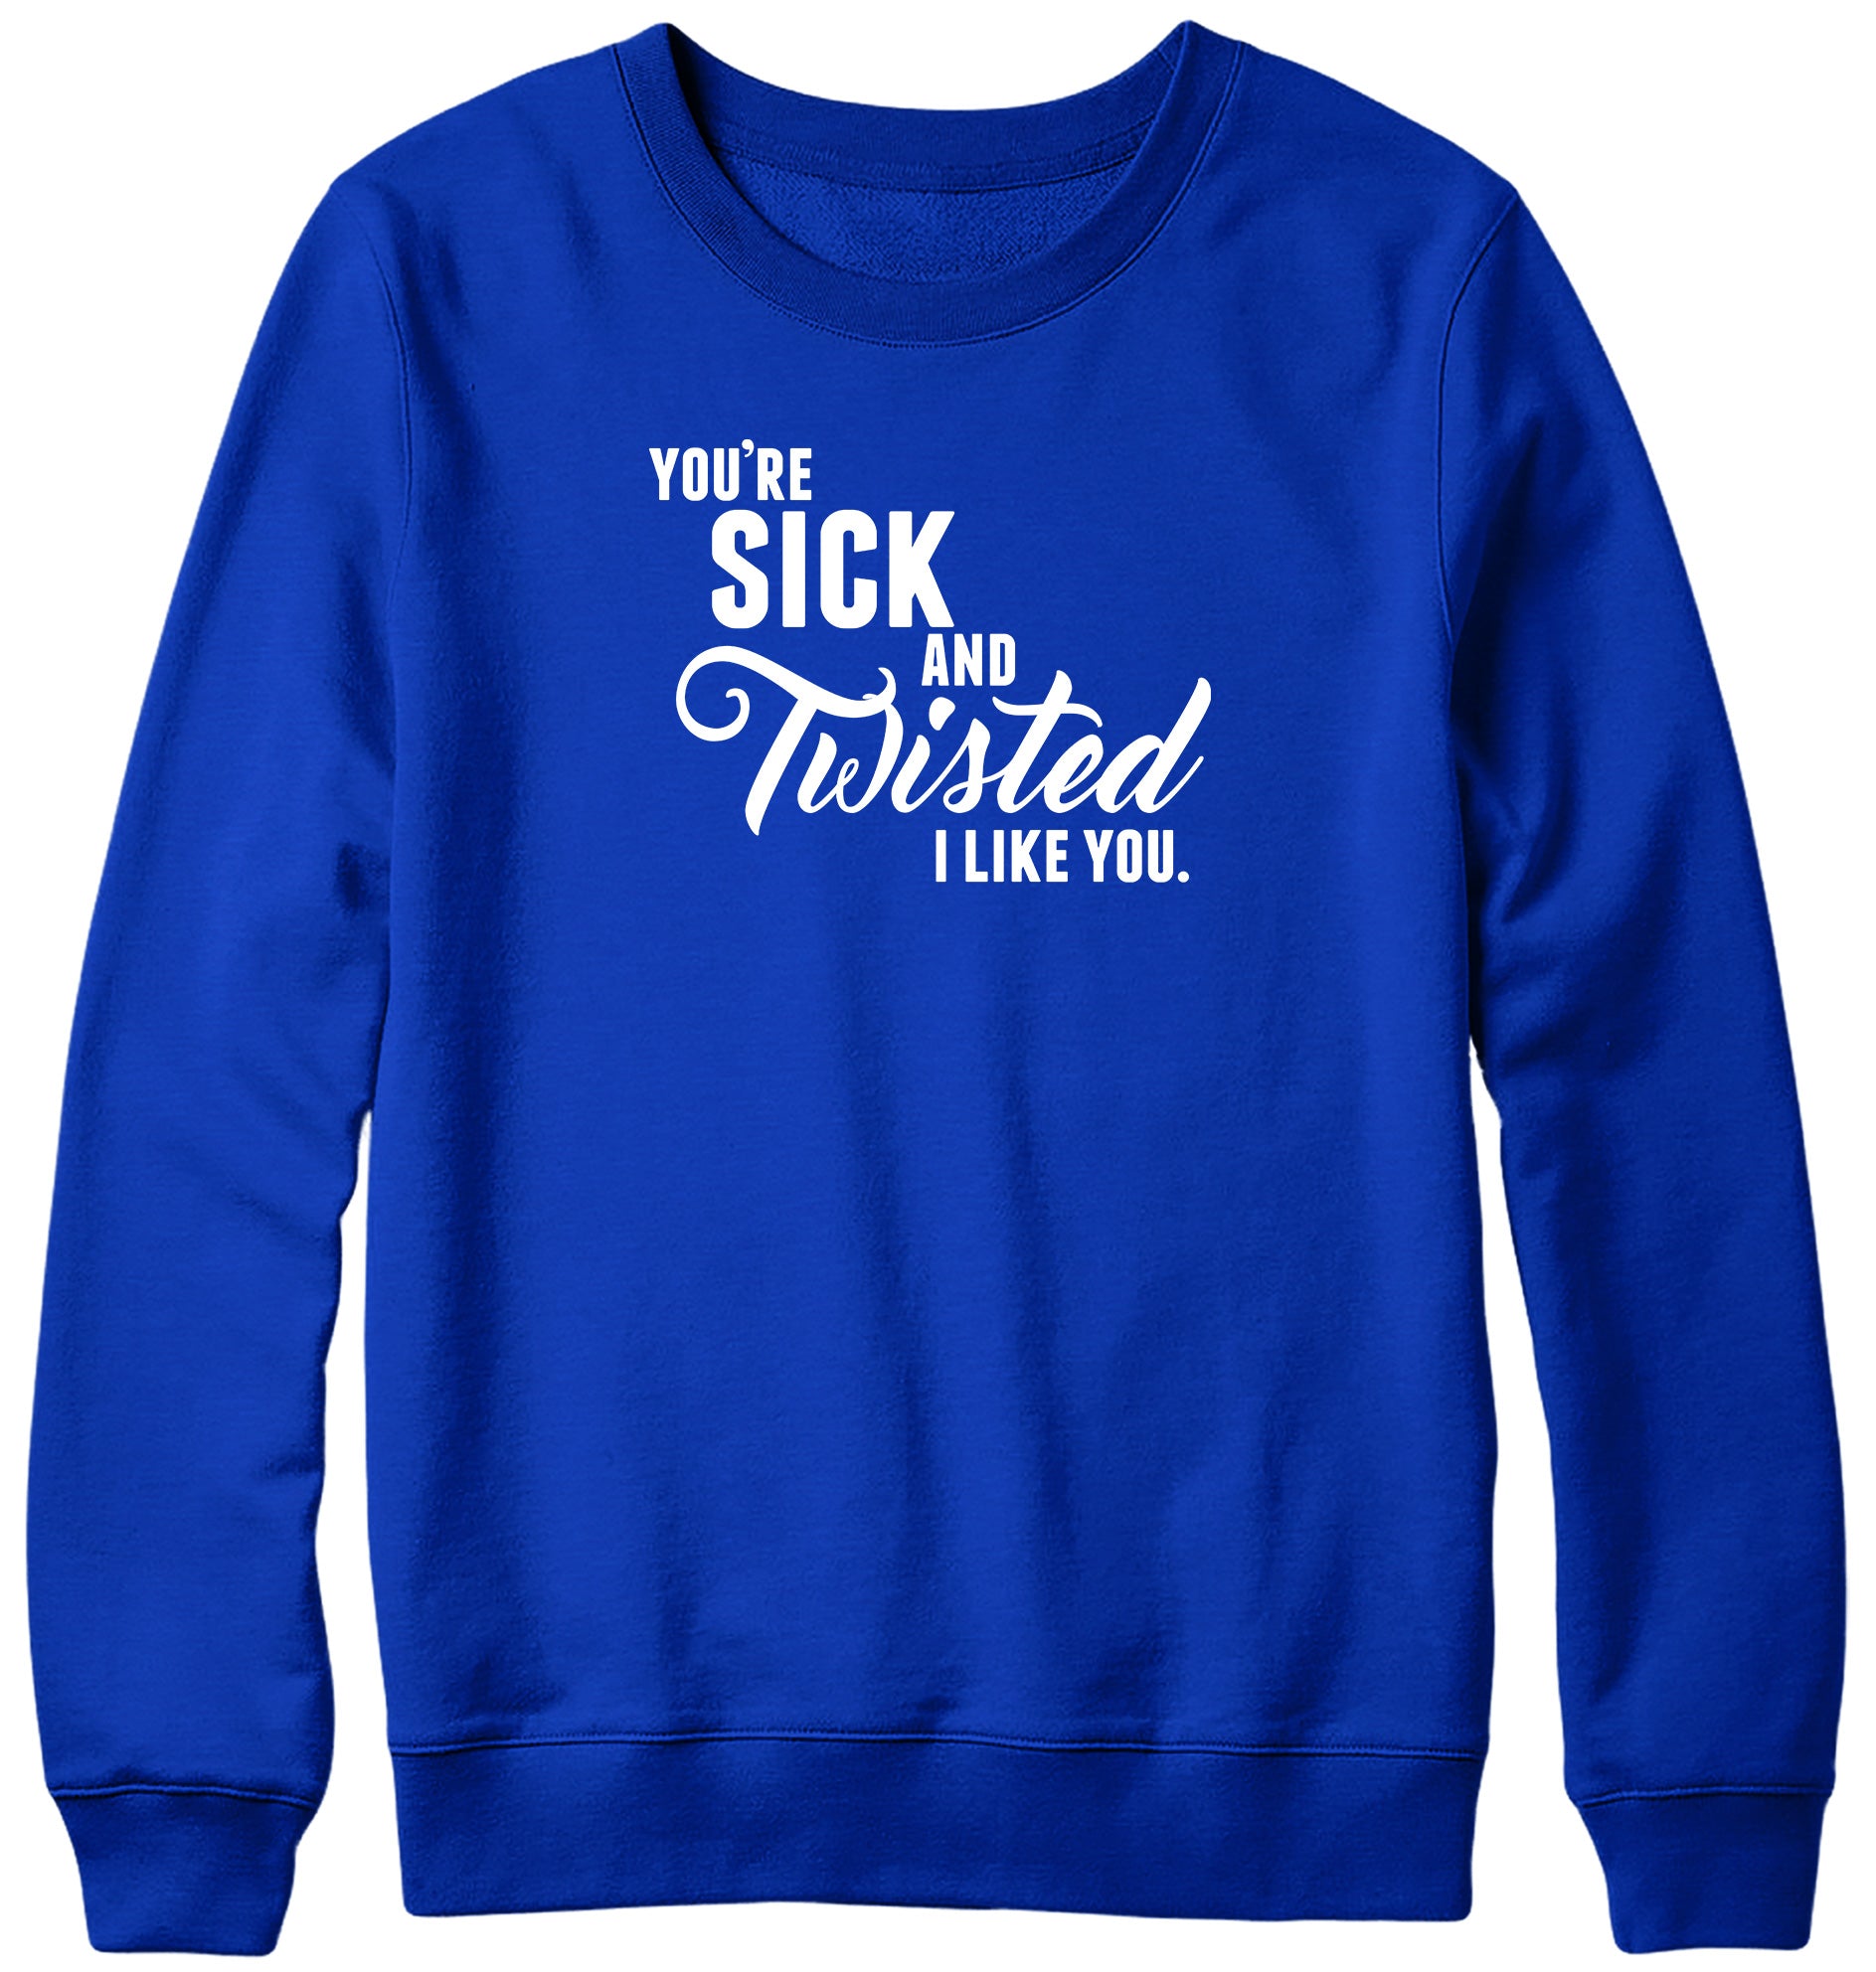 YOU'RE SICK AND TWISTED  I LIKE YOU MENS LADIES WOMENS UNISEX SWEATSHIRT SWEATER